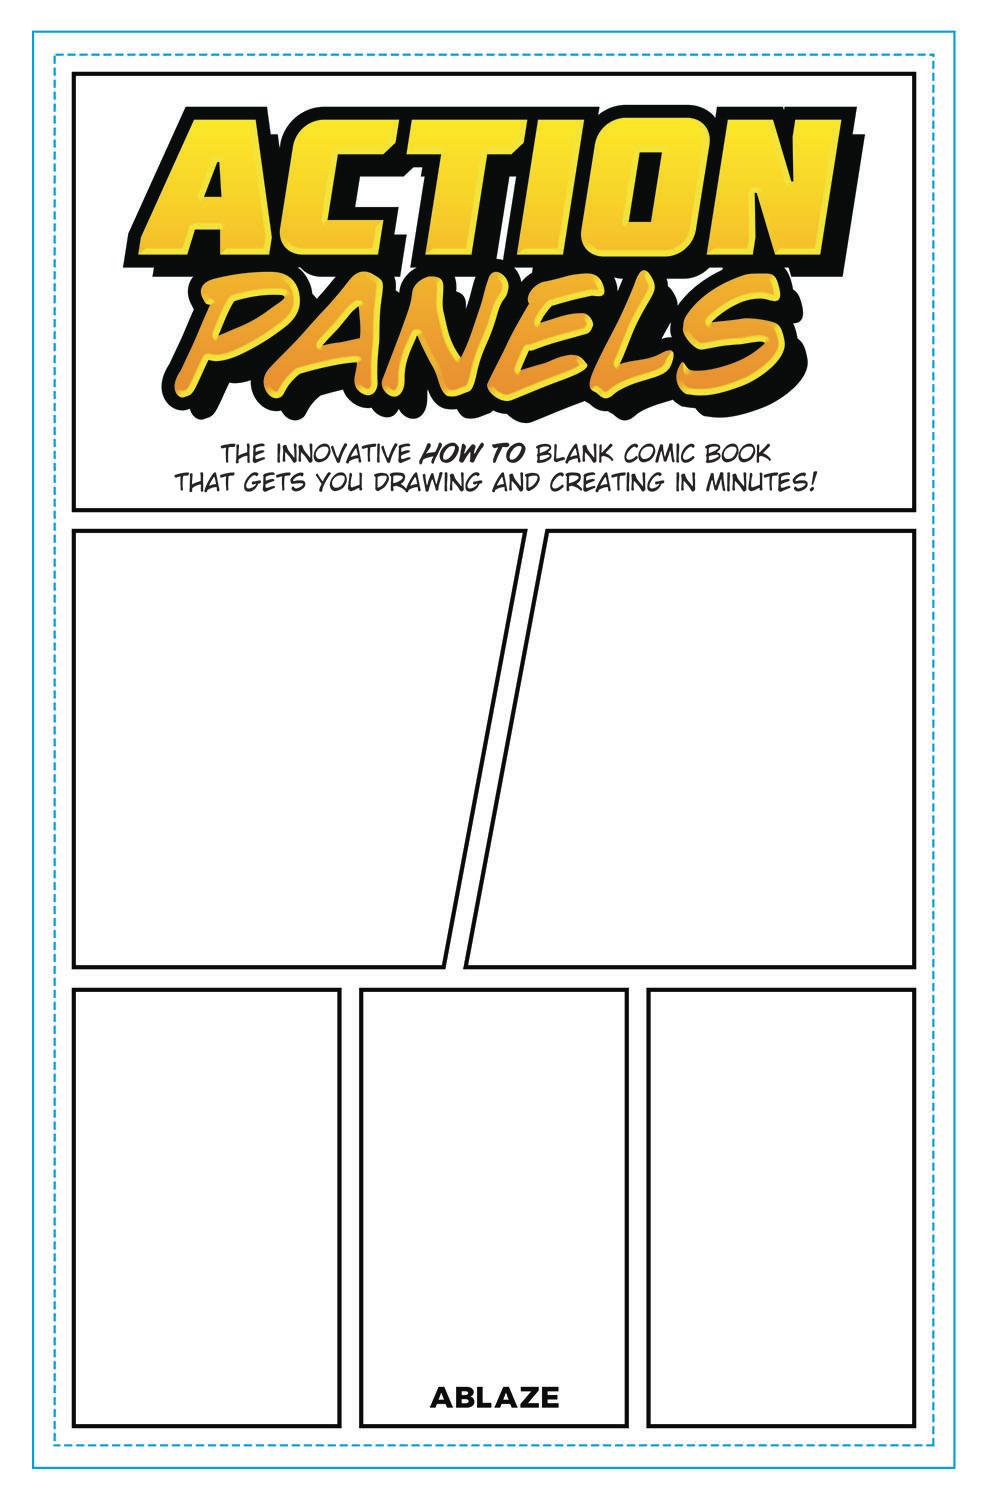 marvel comic page template